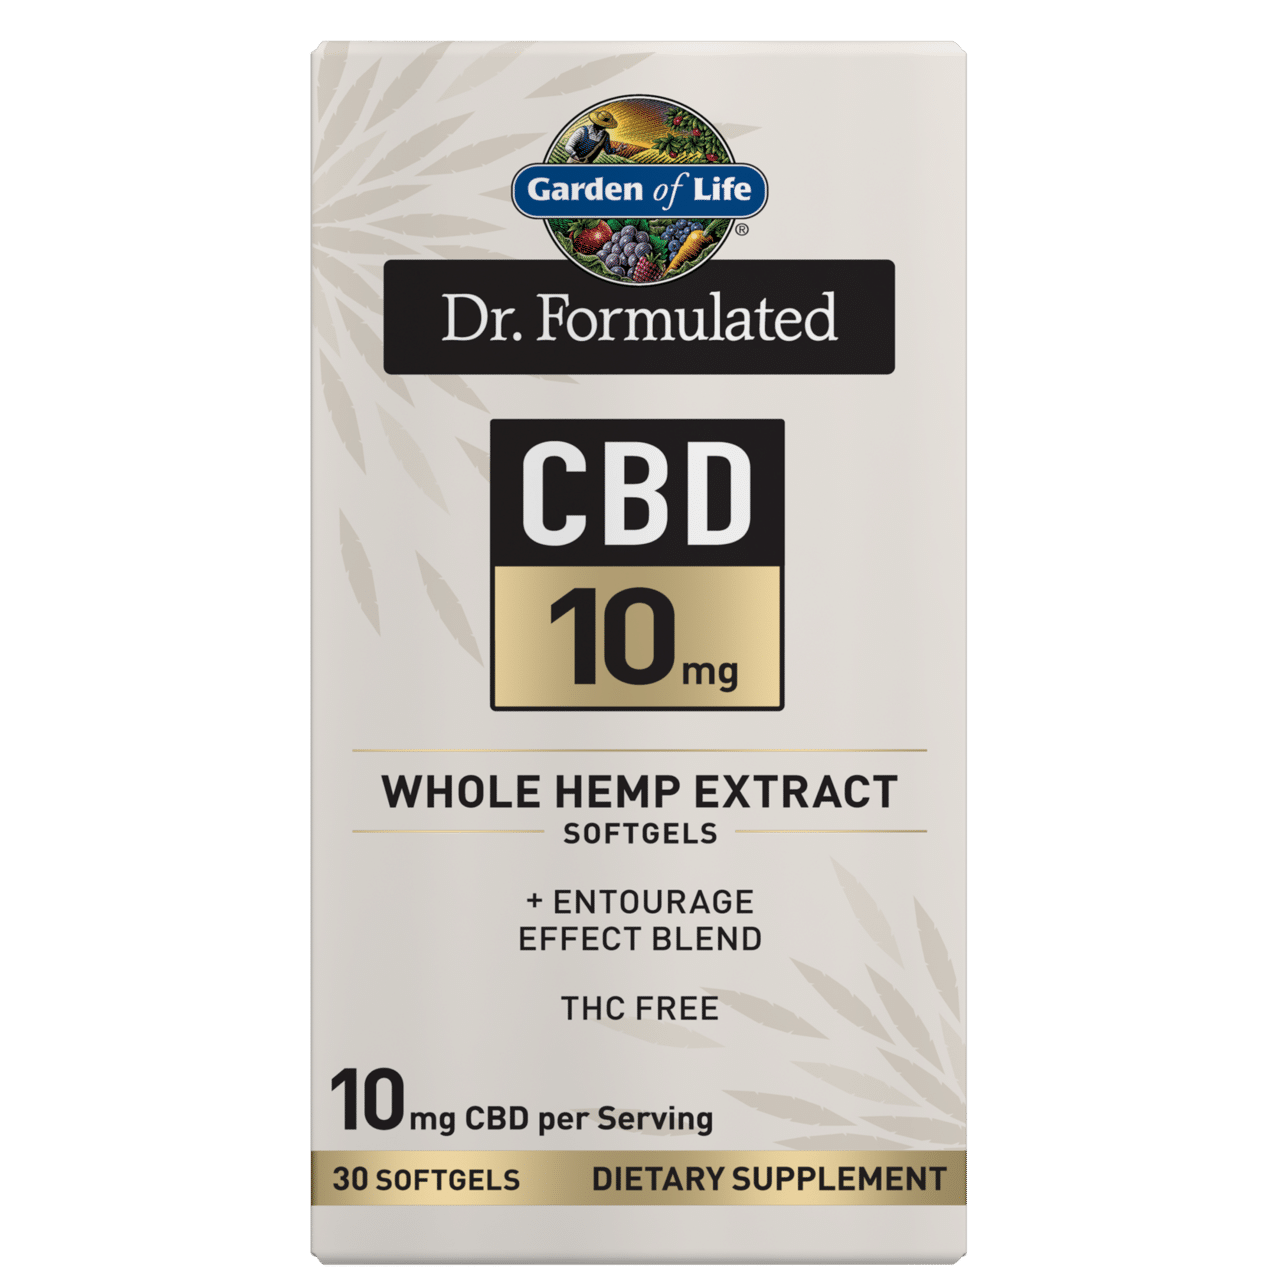 Garden of Life and Dr. Formulated CBD 10mg Softgels